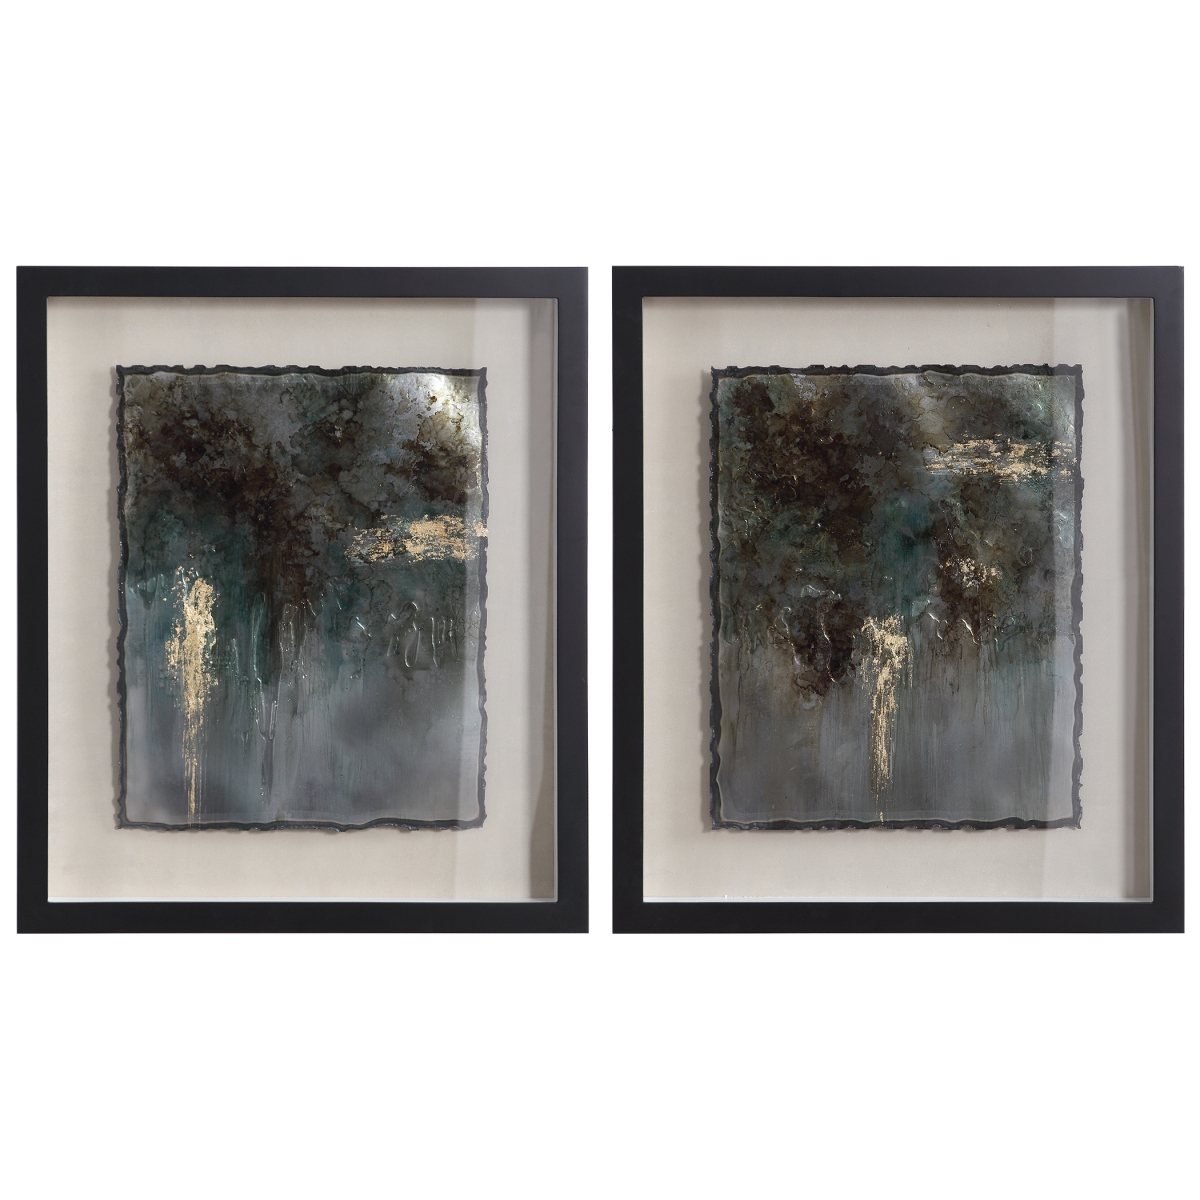 Picture of 212 Main 35366 Rustic Patina Framed Prints - Set of 2